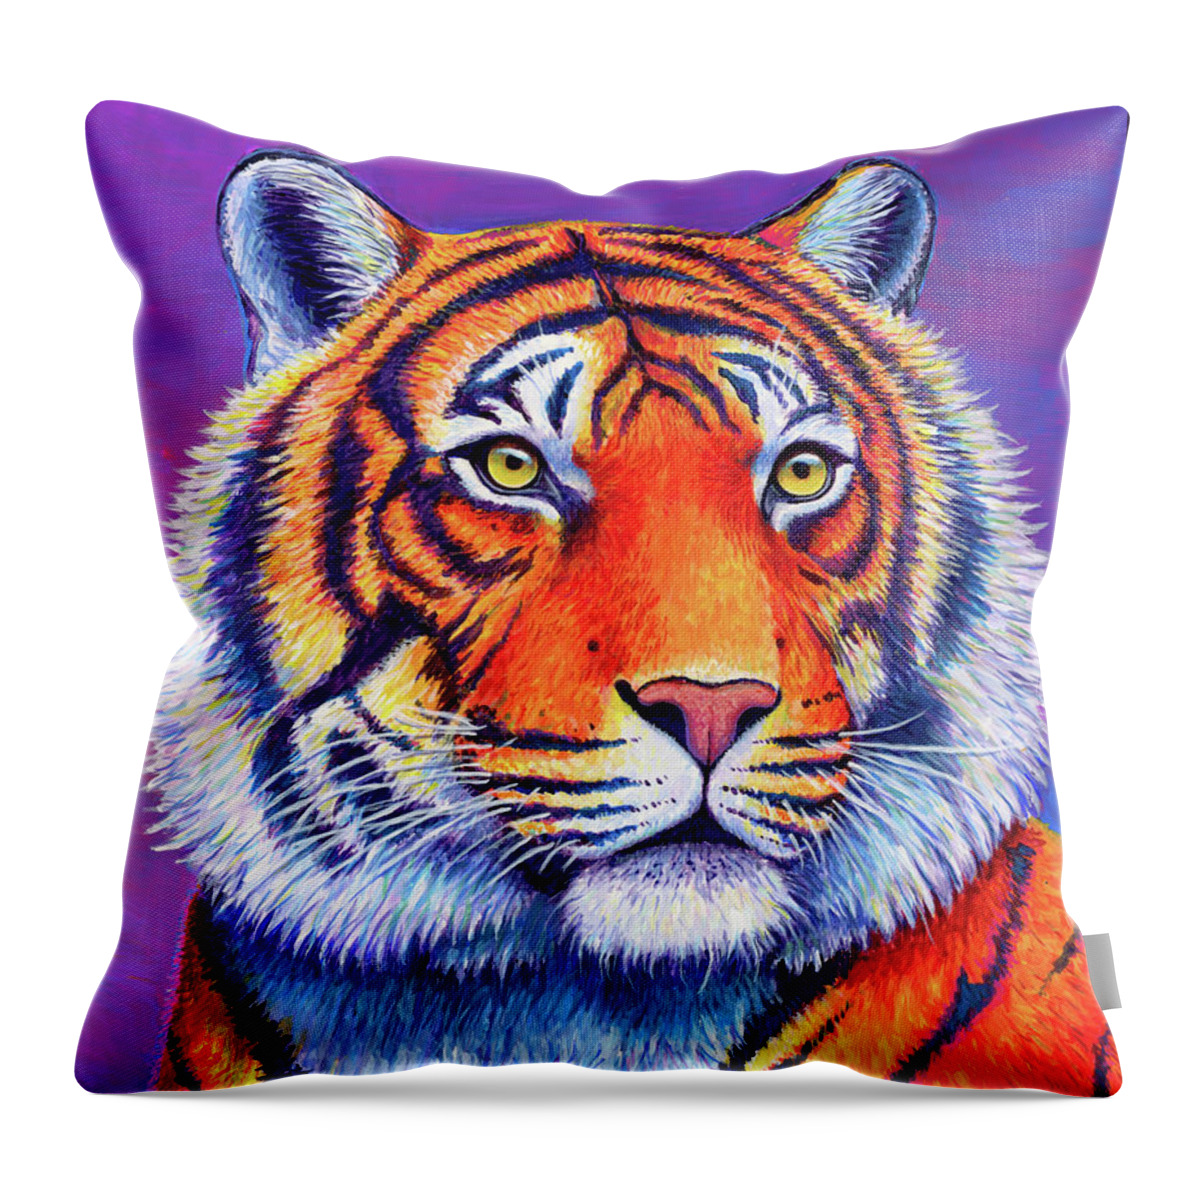 Tiger Throw Pillow featuring the painting Fiery Beauty - Colorful Bengal Tiger by Rebecca Wang